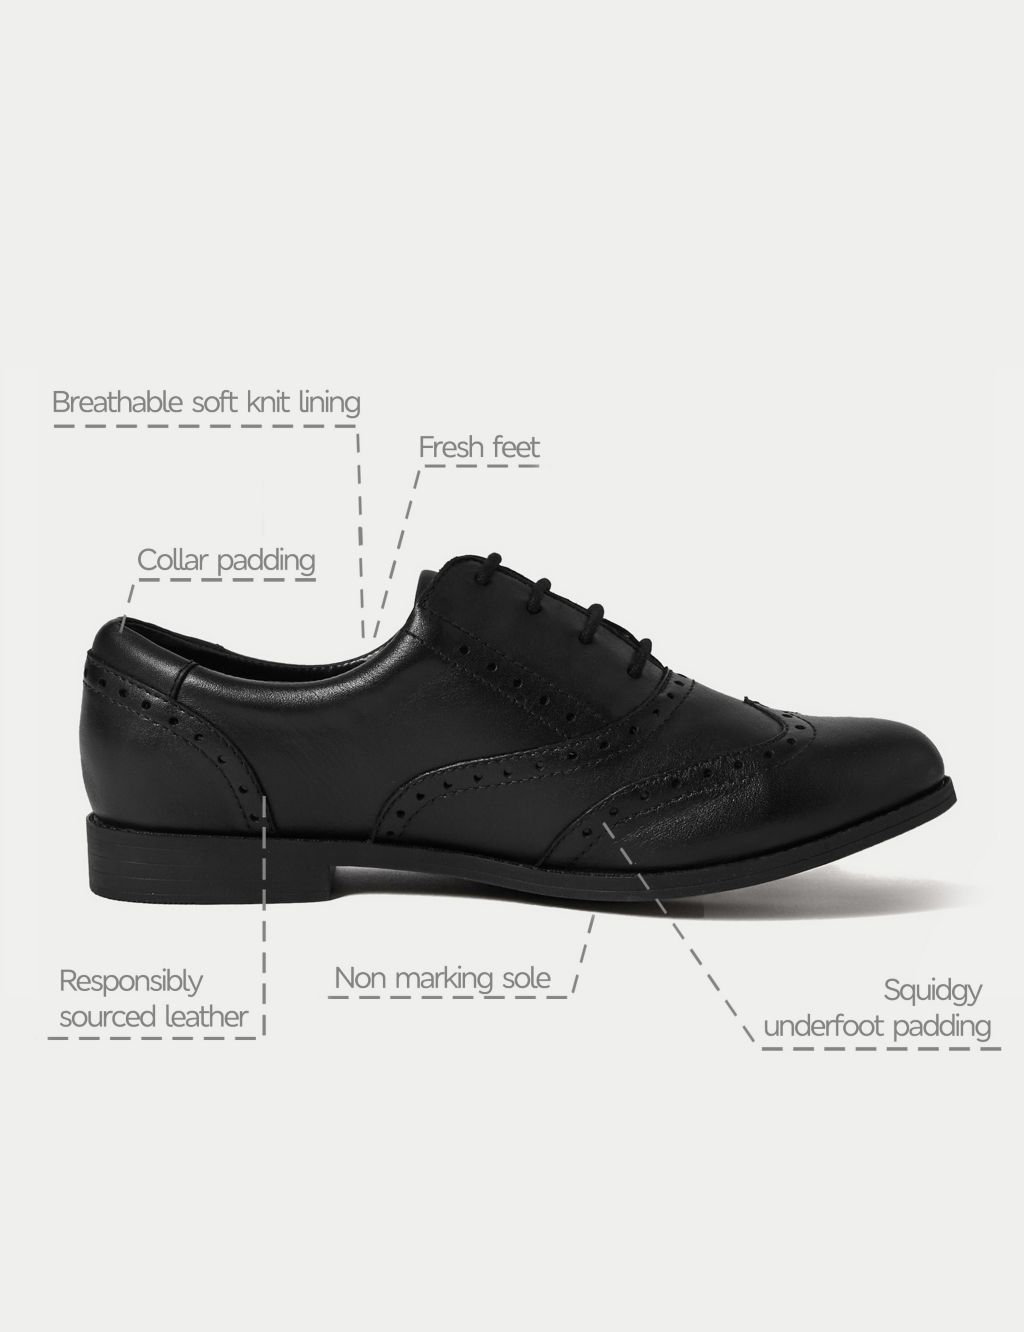 Kids’ Leather Lace-up Brogues School Shoes (13 Small - 7 Large) image 5